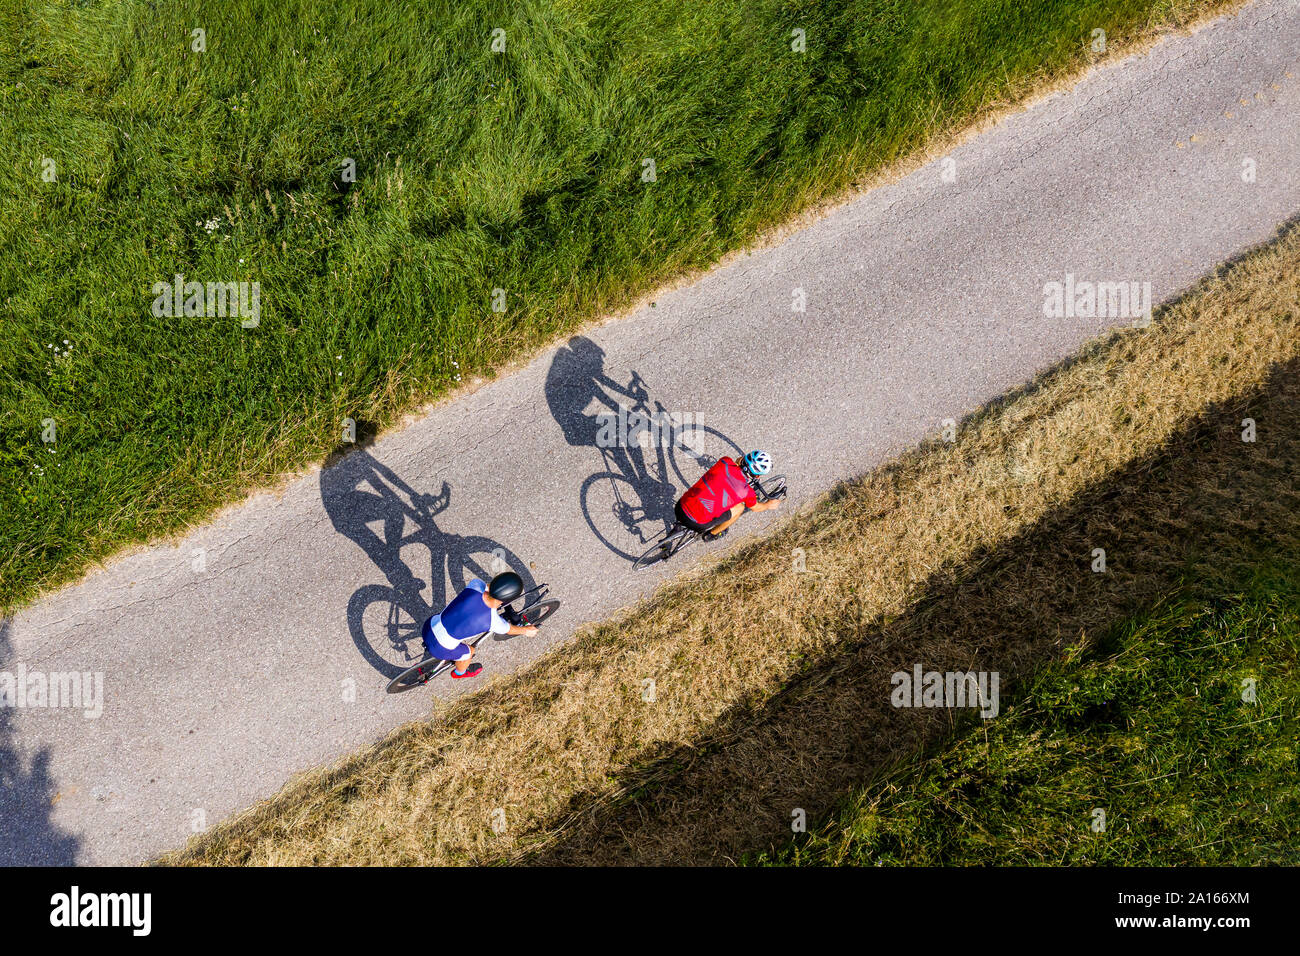 Triathletes riding bicycle on country road, Germany Stock Photo